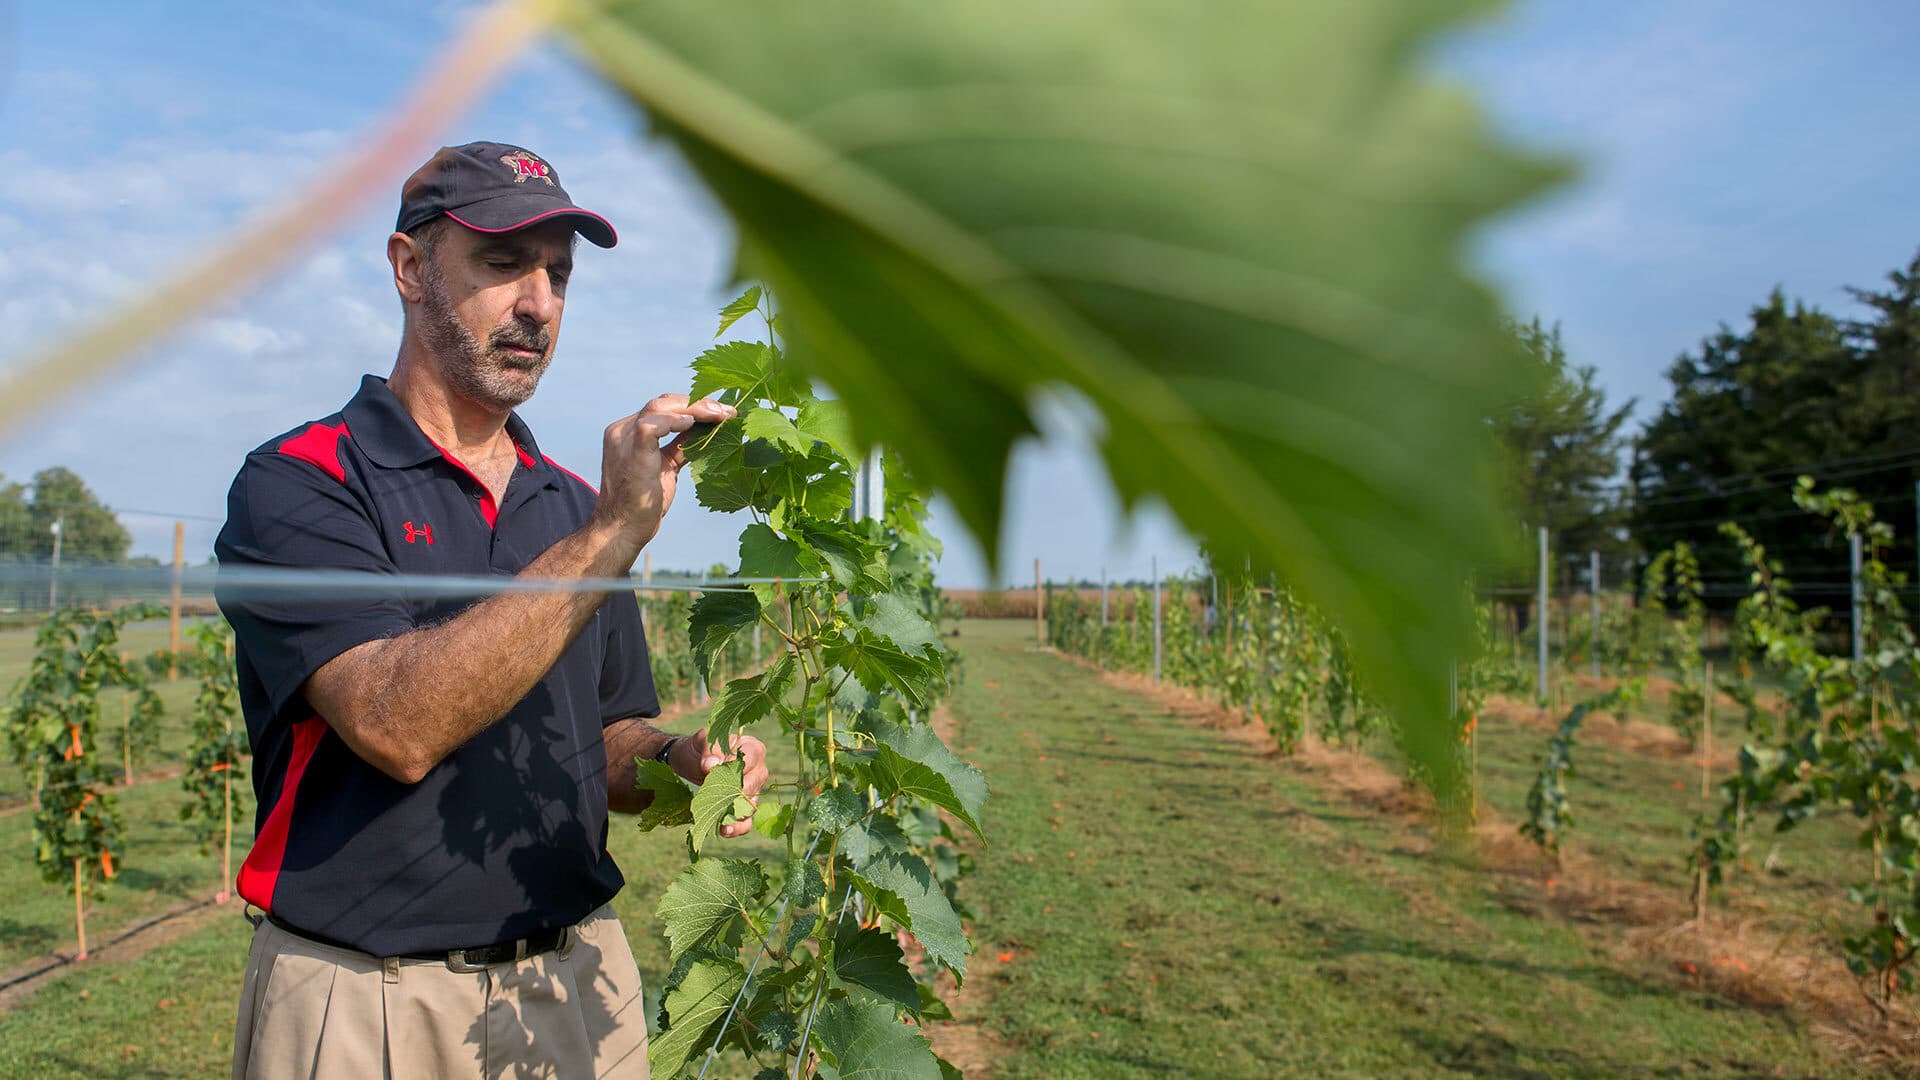 Surrounded by off-target golf balls, viticultural specialist Joe Fiola '86 of University of Maryland Extension examines grape vines planted at the Poolesville Golf Course in Montgomery County, Md.